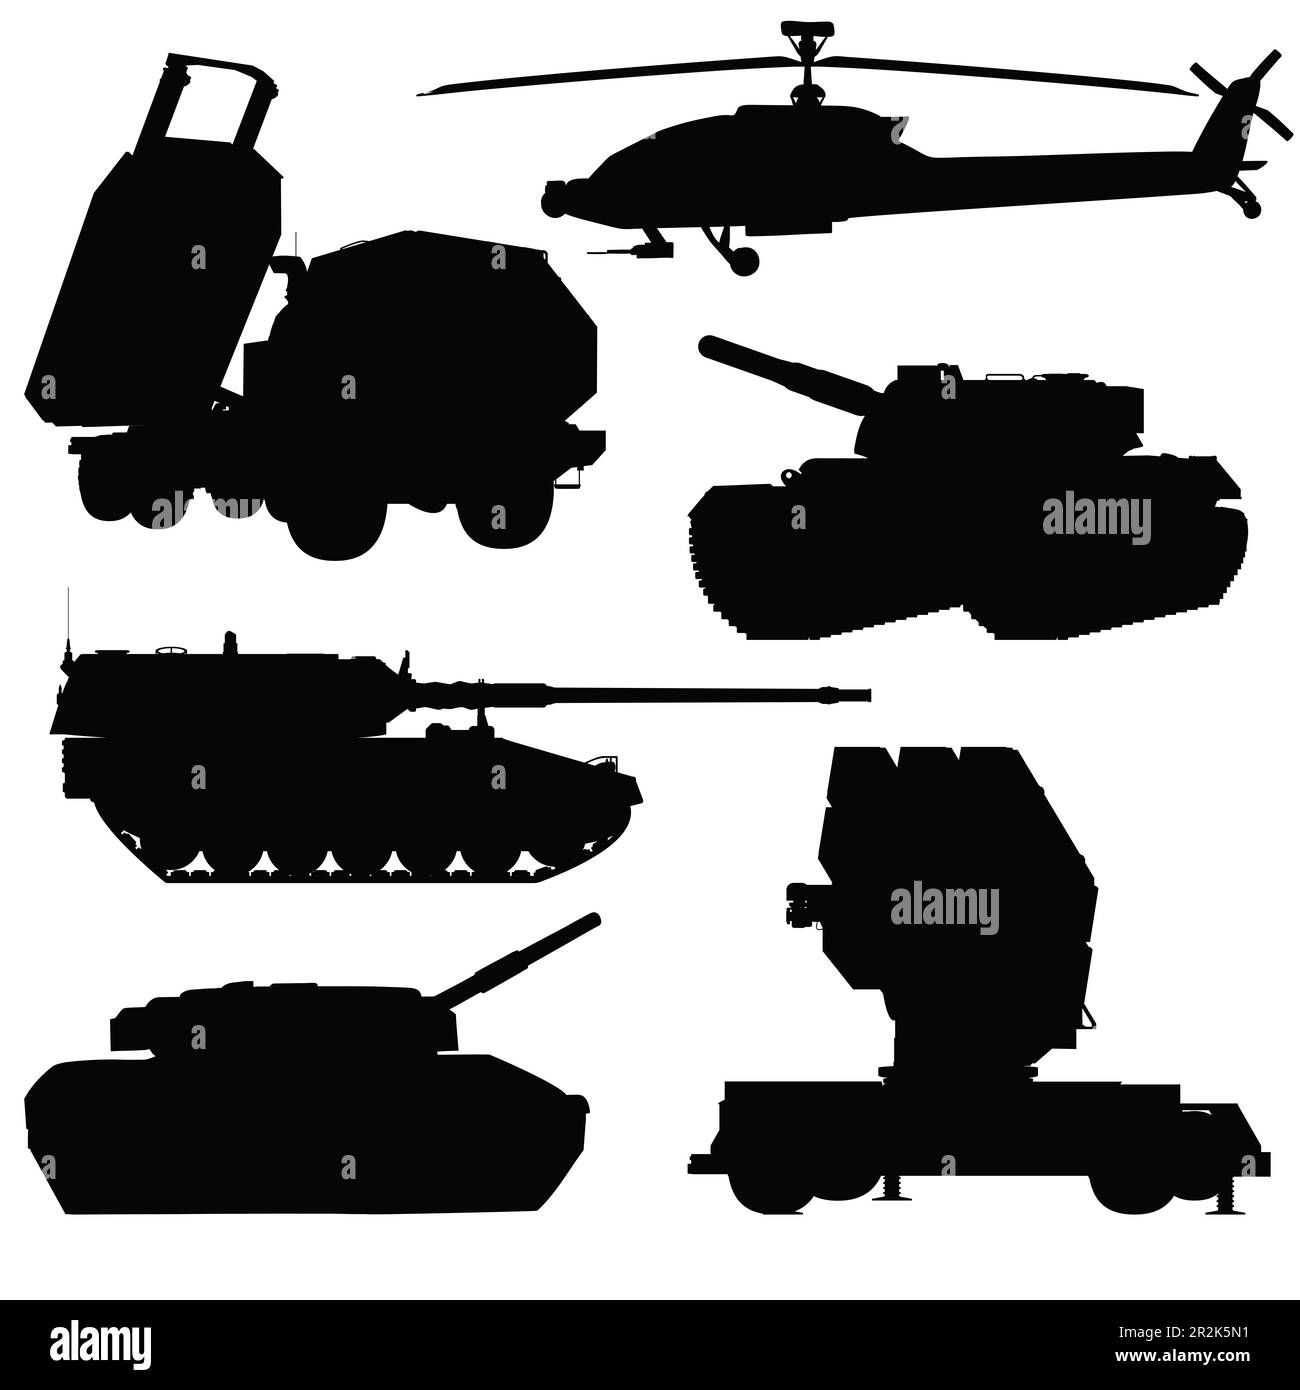 Military vehicles silhouette SET. HIMARS, Battle tank, Air defense system. Helicopter apache. Self-propelled howitzer. Illustration isolated on white background. Stock Photo